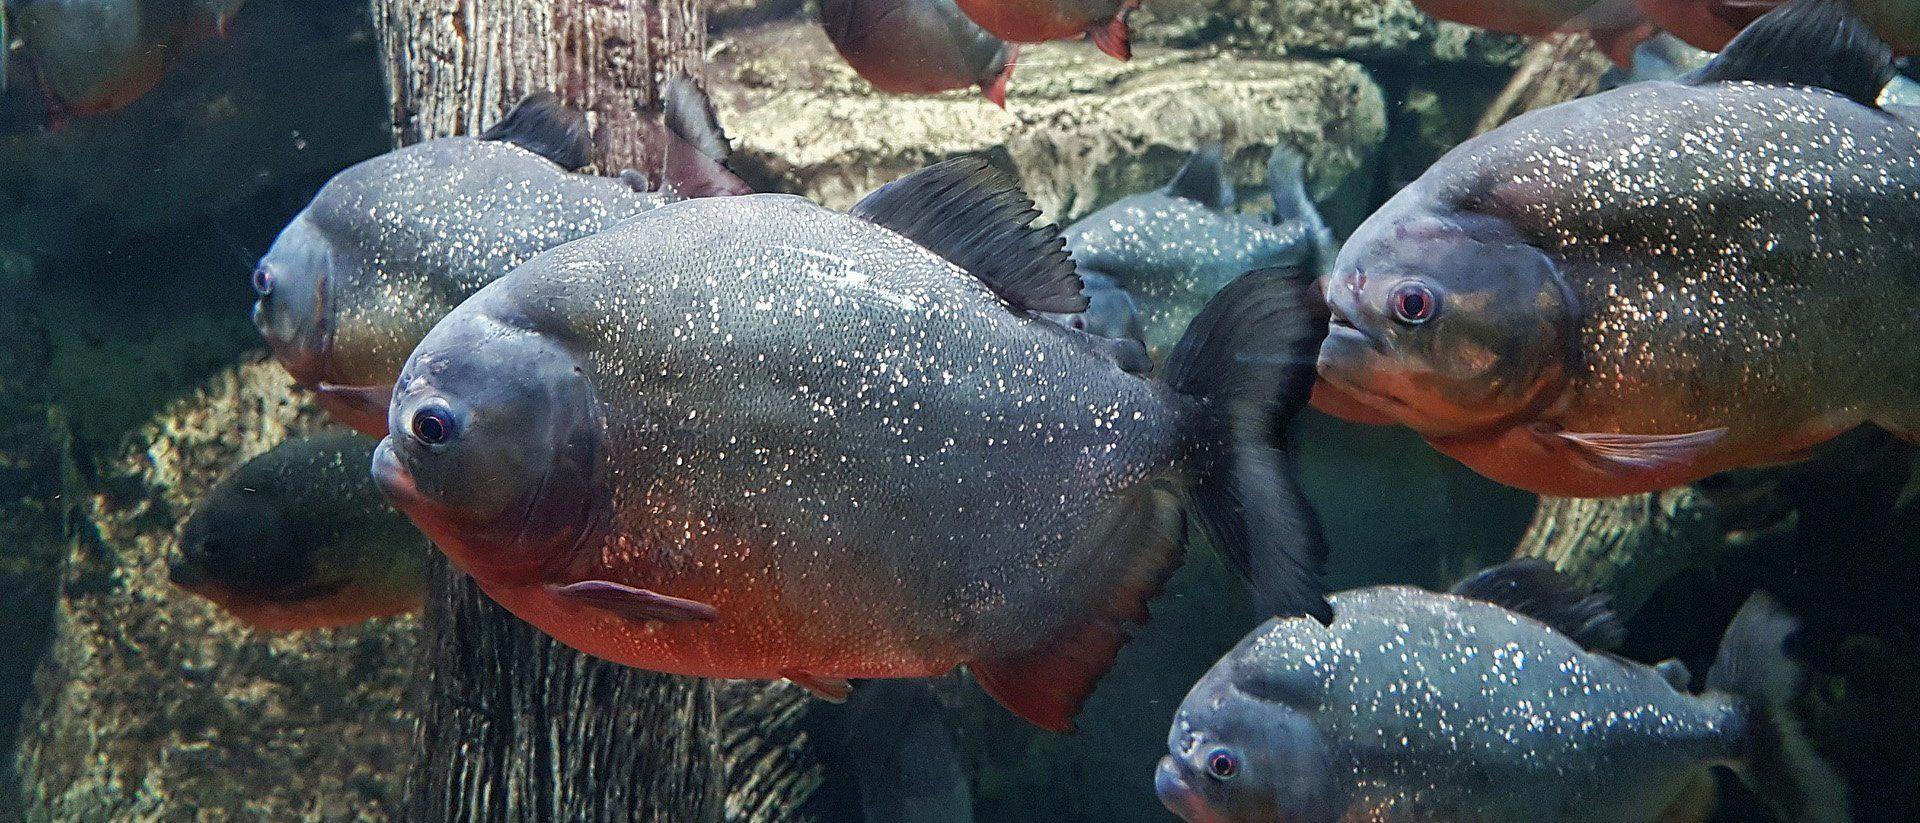 can piranhas really eat humans